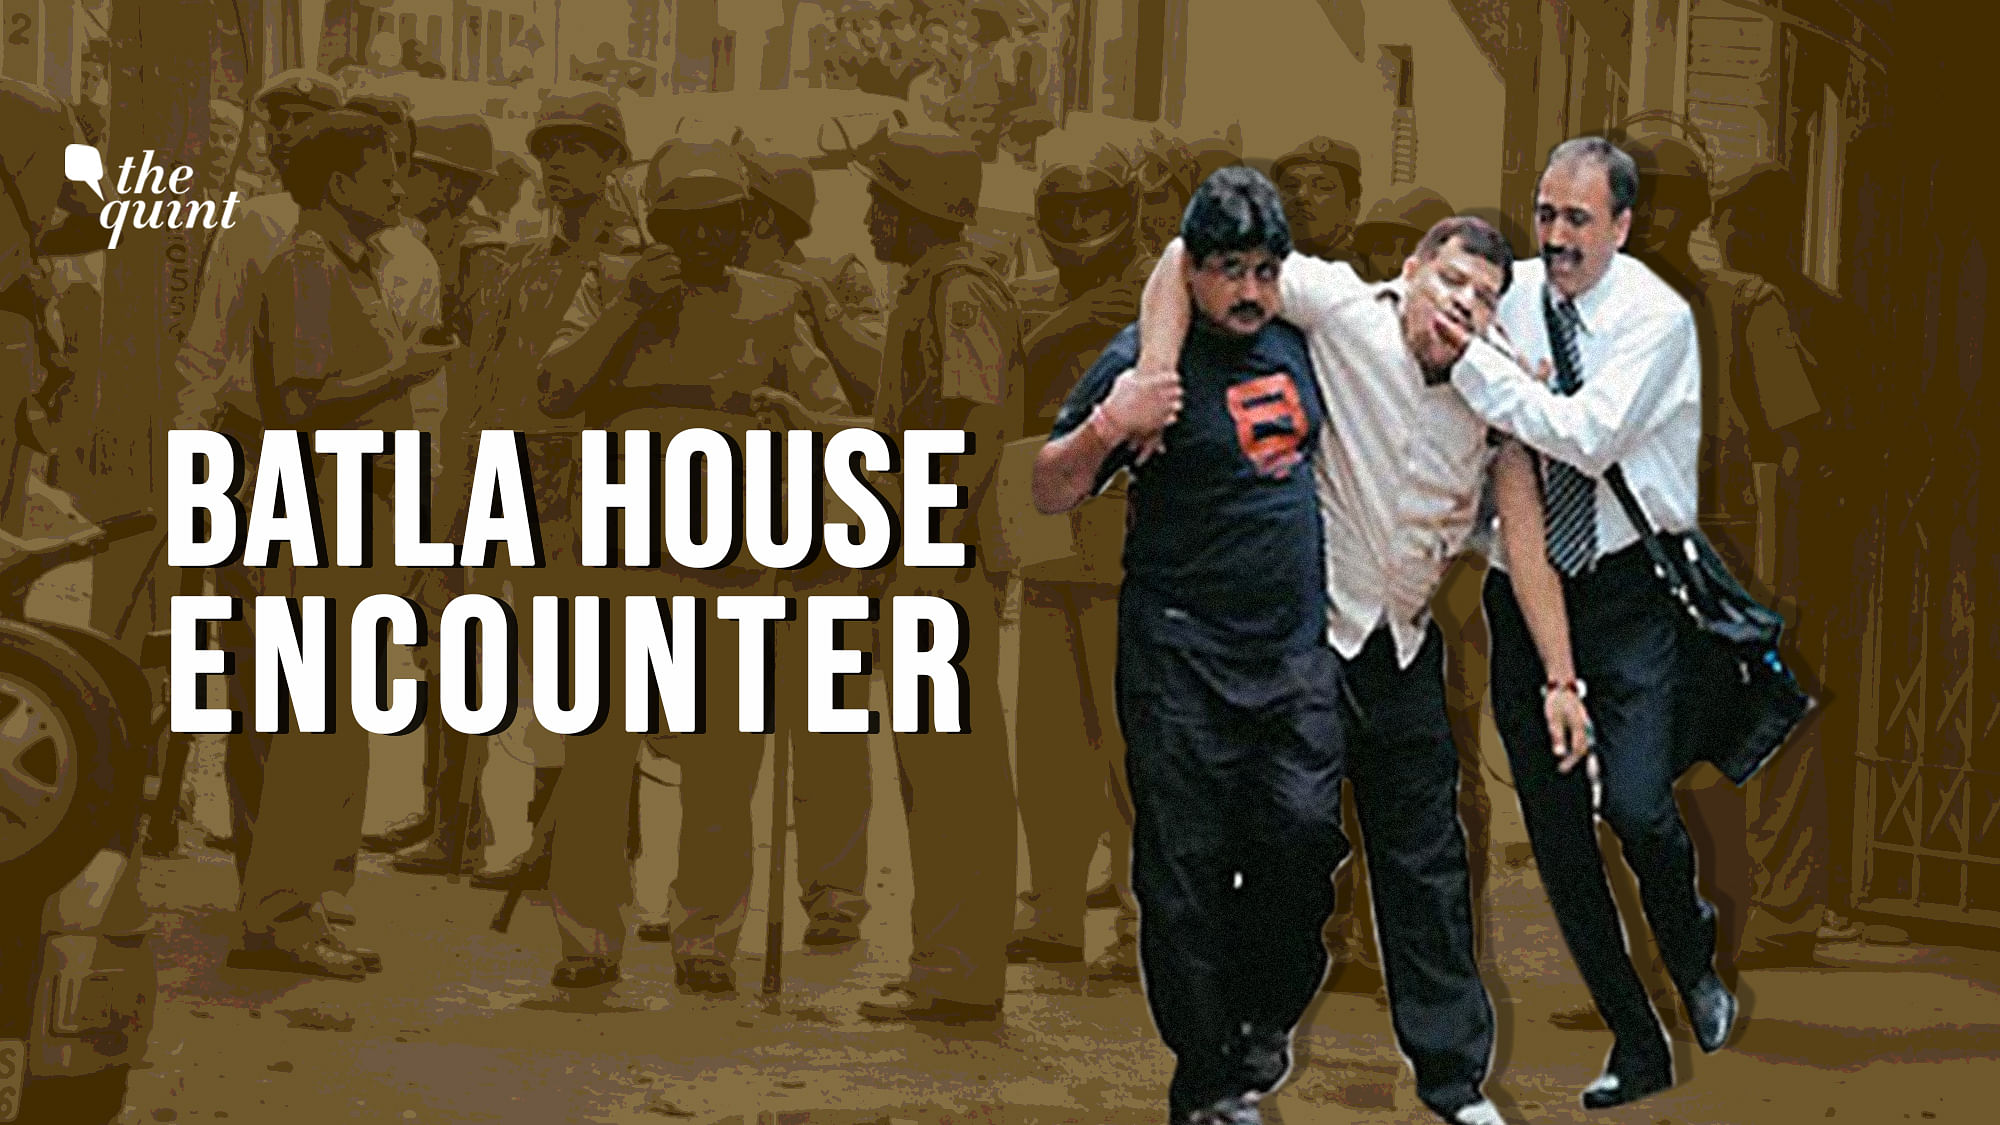 It’s been 12 years since the Batla House encounter, but many questions still remain unanswered.